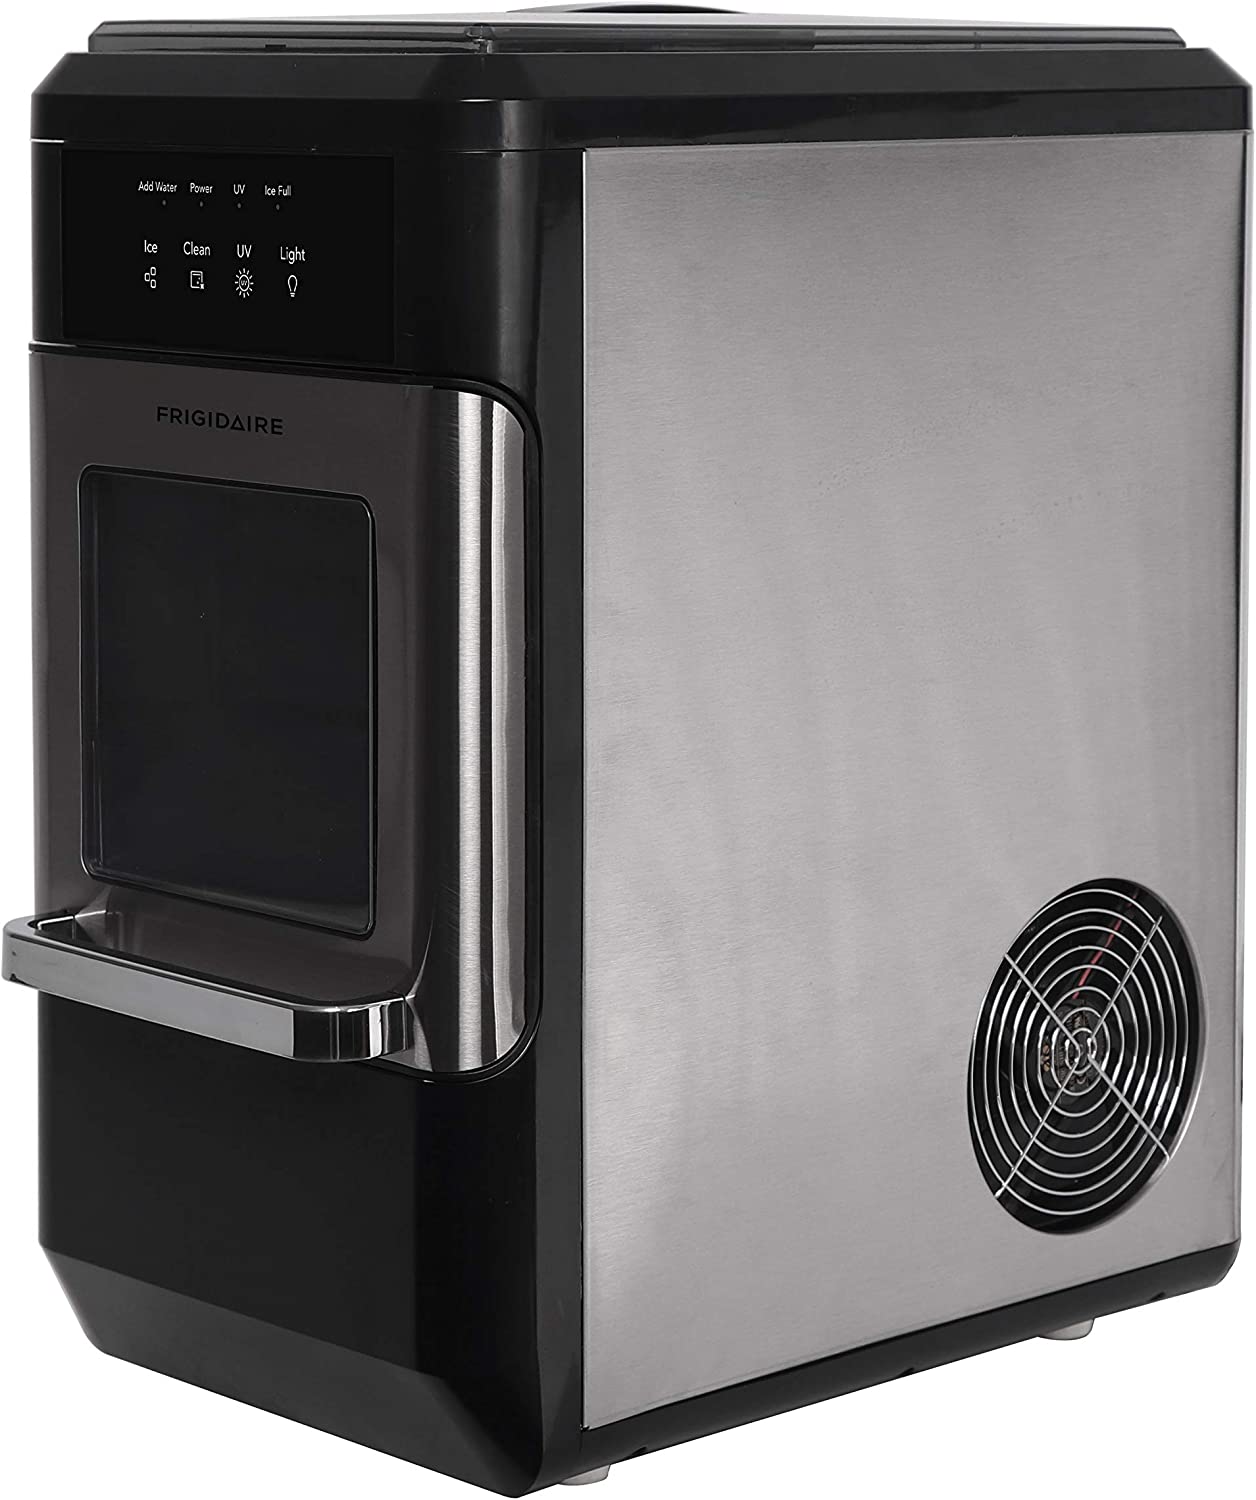 Frigidaire EFIC235-AMZ Countertop Crunchy Chewable Nugget Ice Maker, 44lbs  per day, Self Cleaning Function